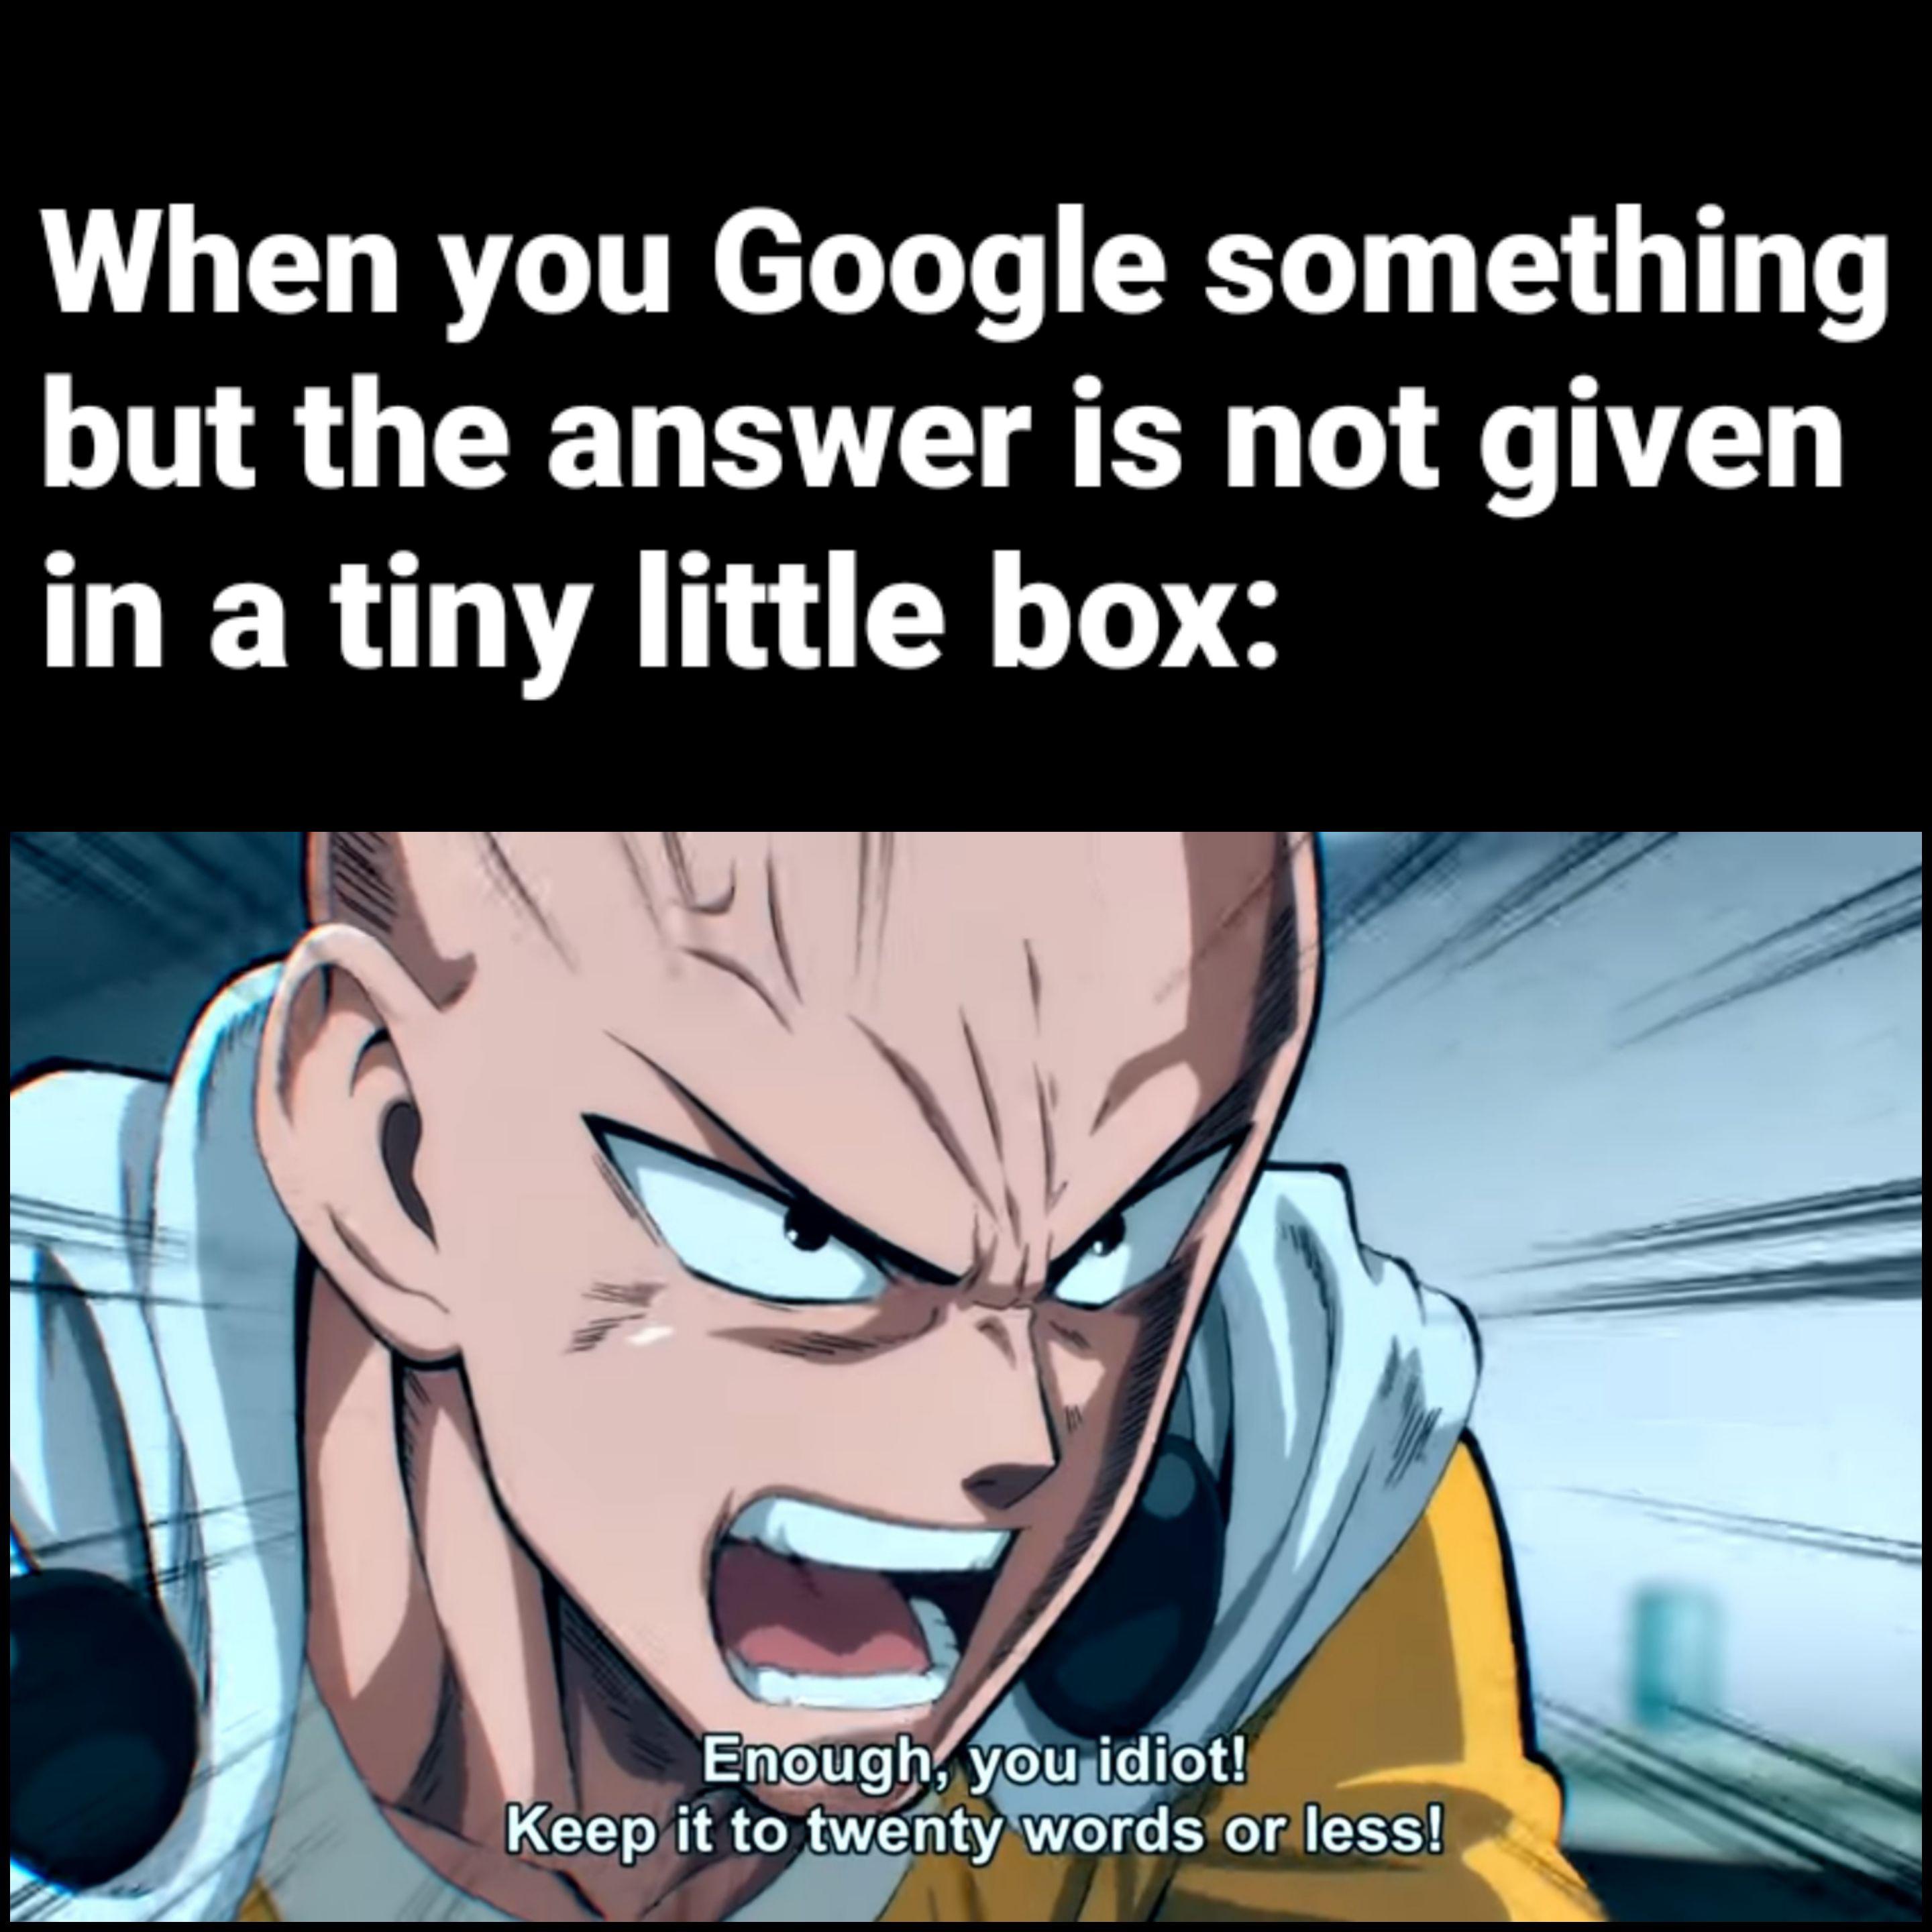 summarize it in 20 words or less - When you Google something but the answer is not given in a tiny little box Enough, you idiot! Keep it to twenty words or less!